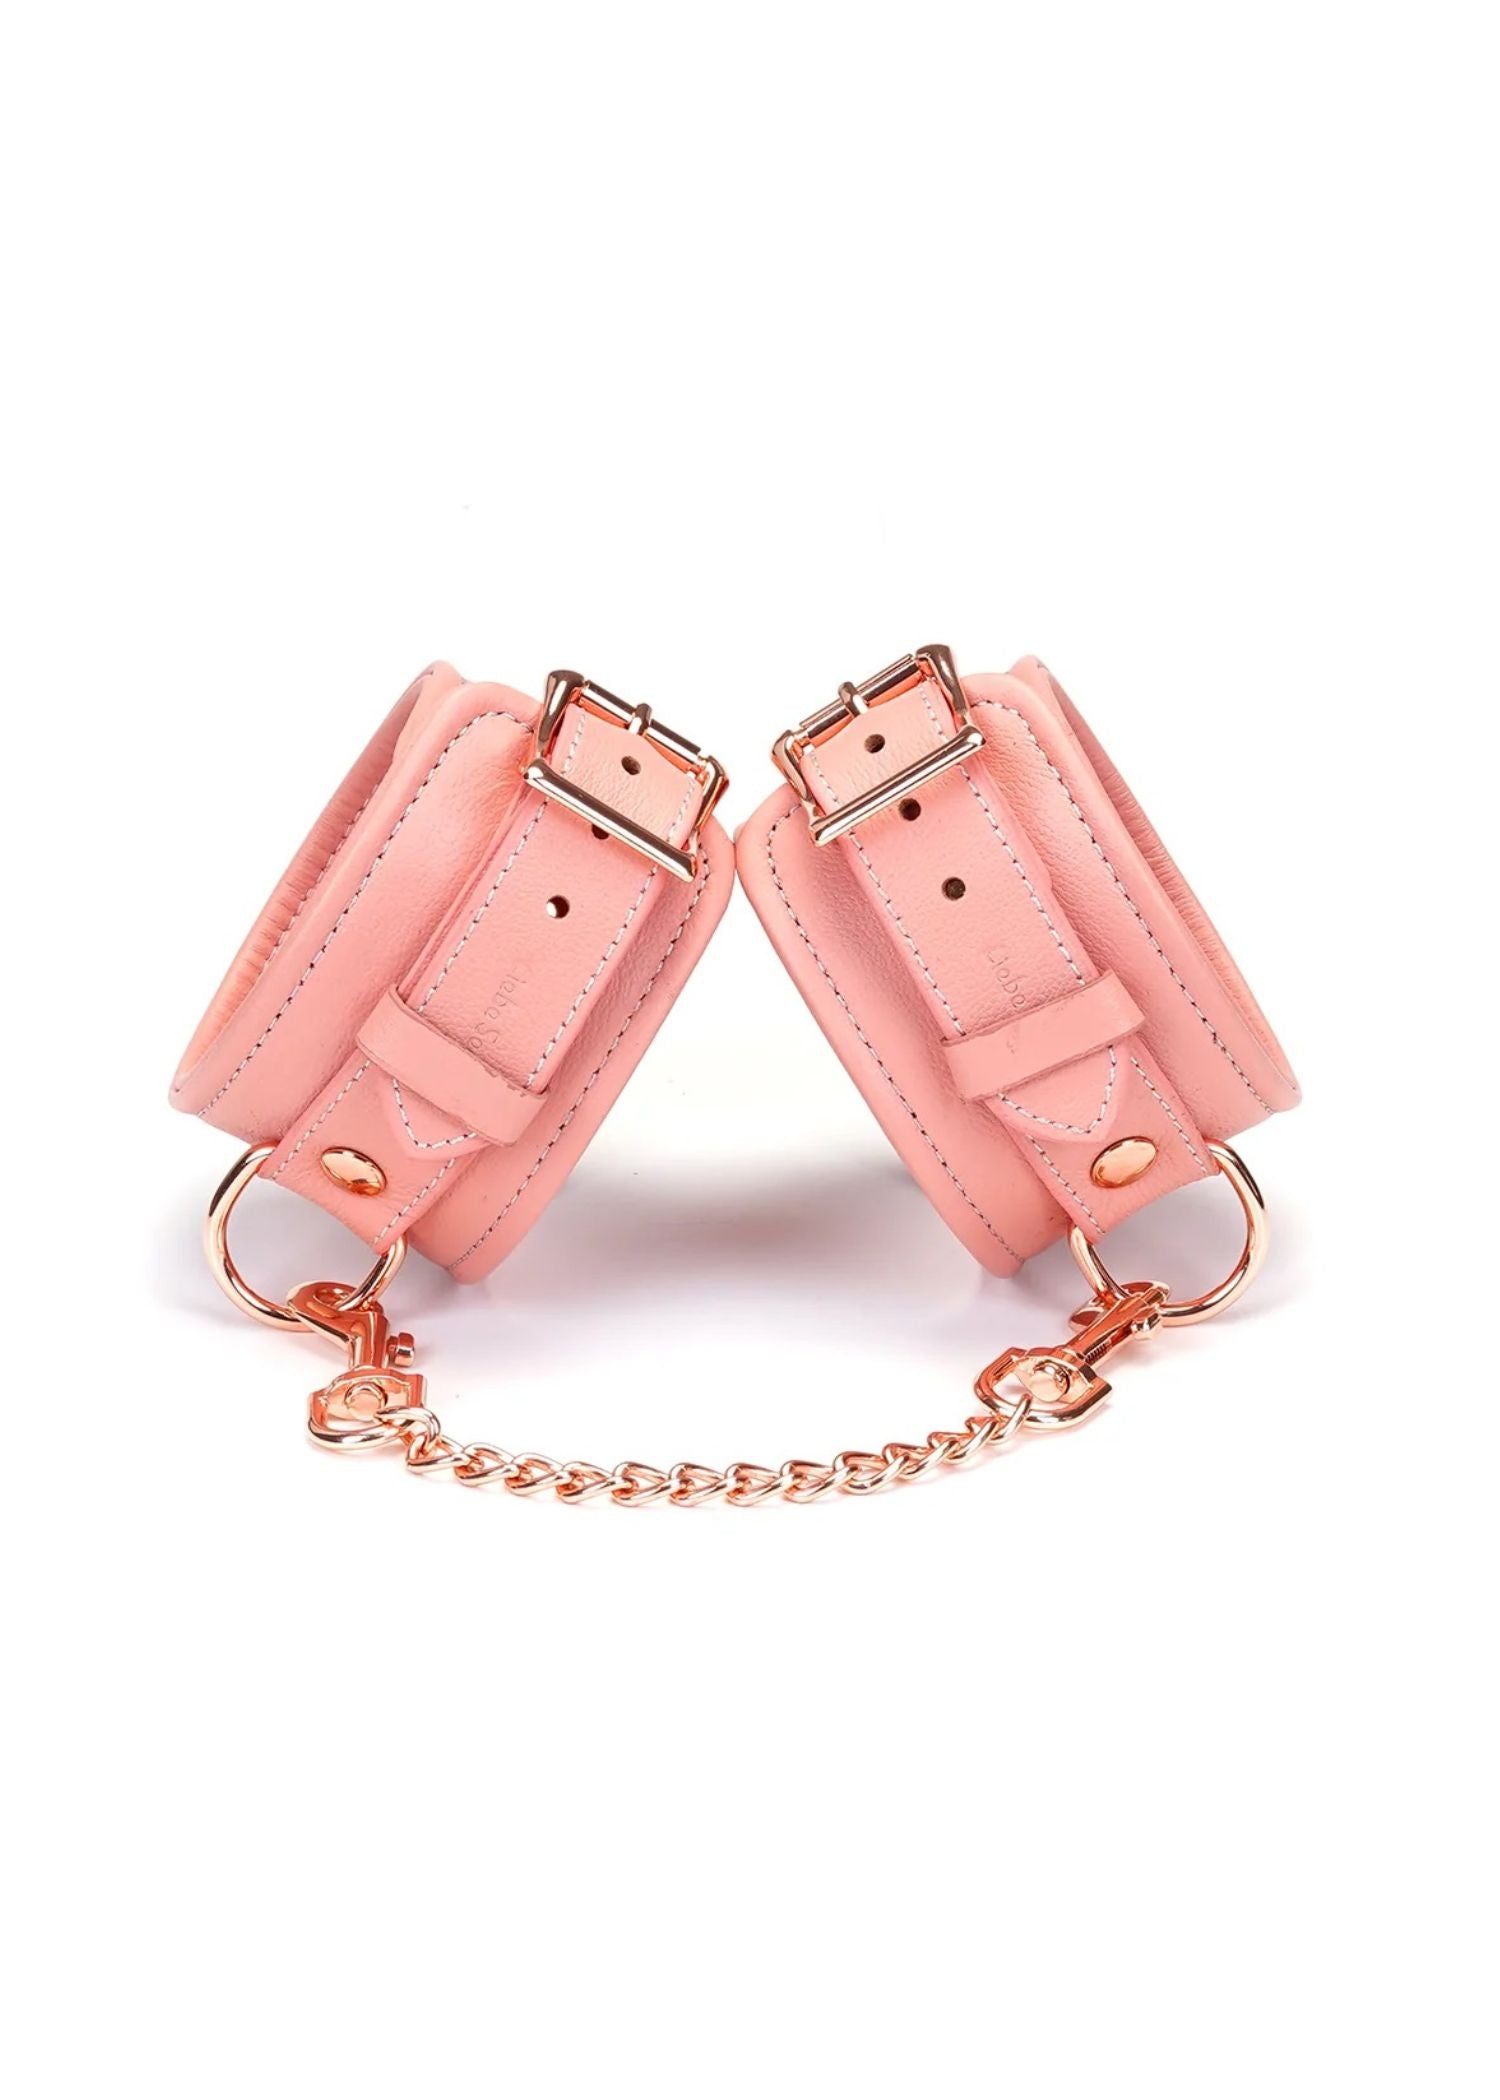 Liebe Seele Pink Dream Leather Ankle Cuffs | Avec Amour